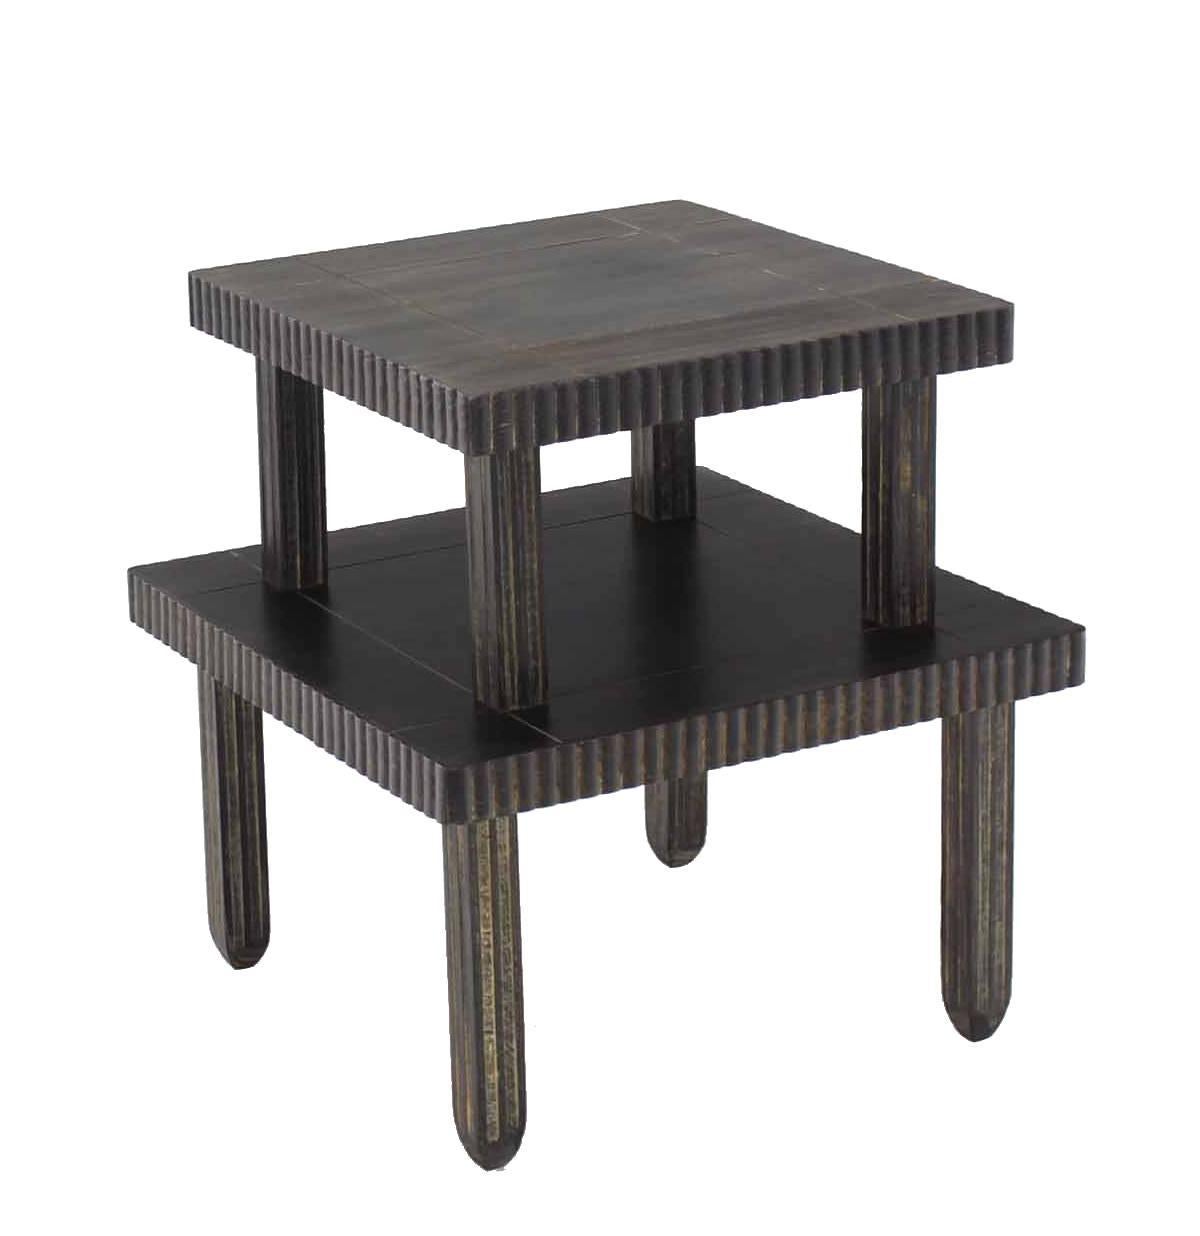 Non Matching Pair of Cerused Finish Step End Tables In Excellent Condition For Sale In Rockaway, NJ